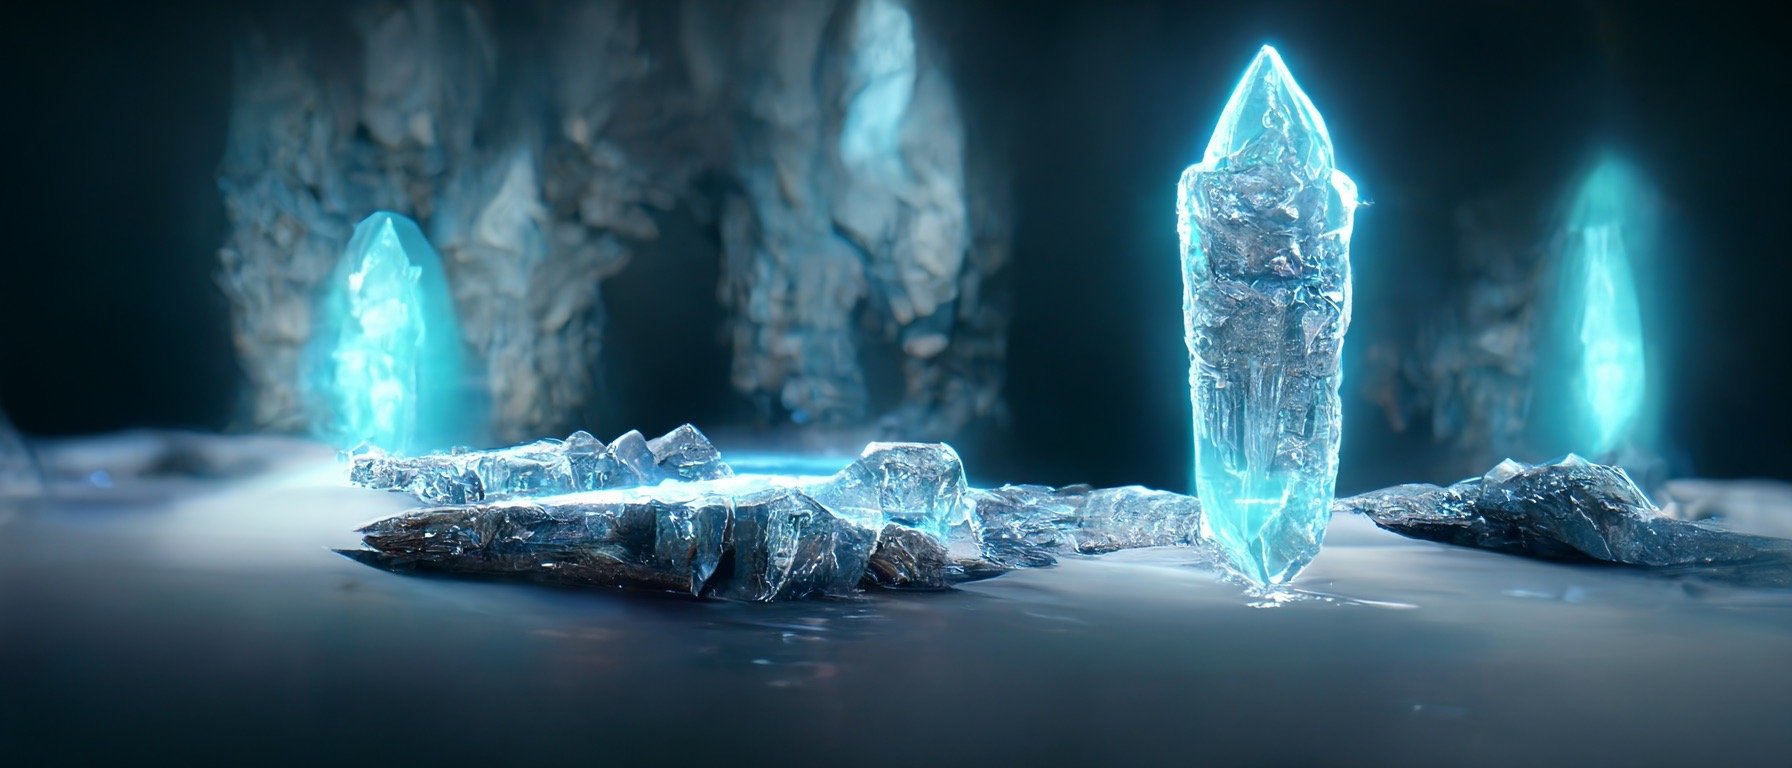 069d3ac2-ab0c-44c9-ae0f-96ce67d21af9_S3RAPH_httpss.mj.runsmUiUh__frozen_trident_in_ice_cave_with_reflective_crystals._8k_cinematic_composition_r.JPG